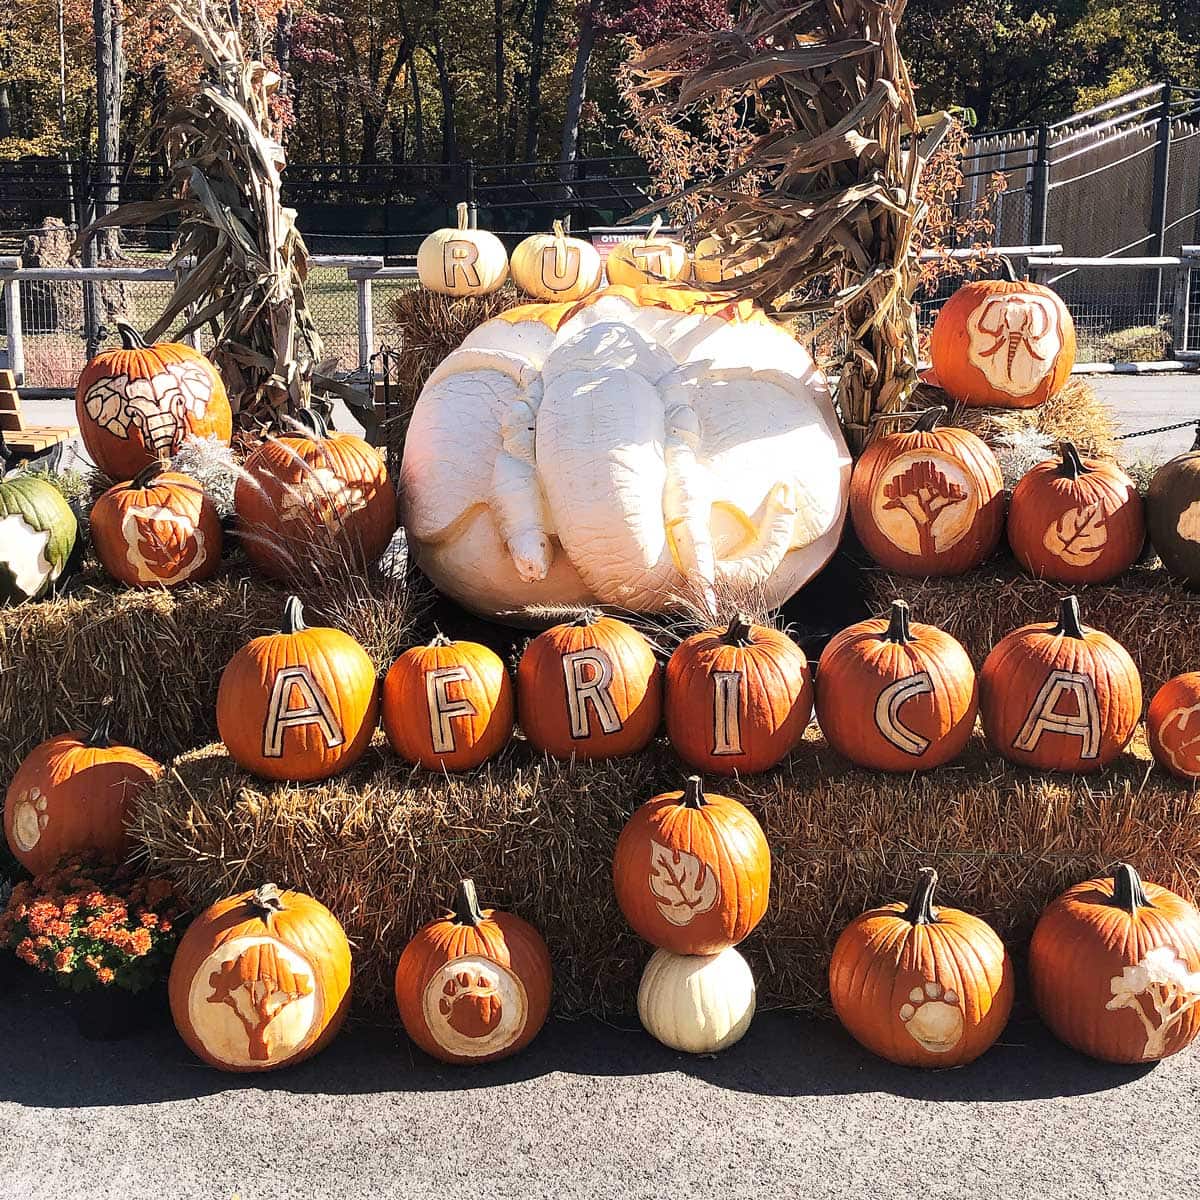 Life Is Sweet October 2019 - Carved pumpkins on display at MKE County Zoo for Halloween.